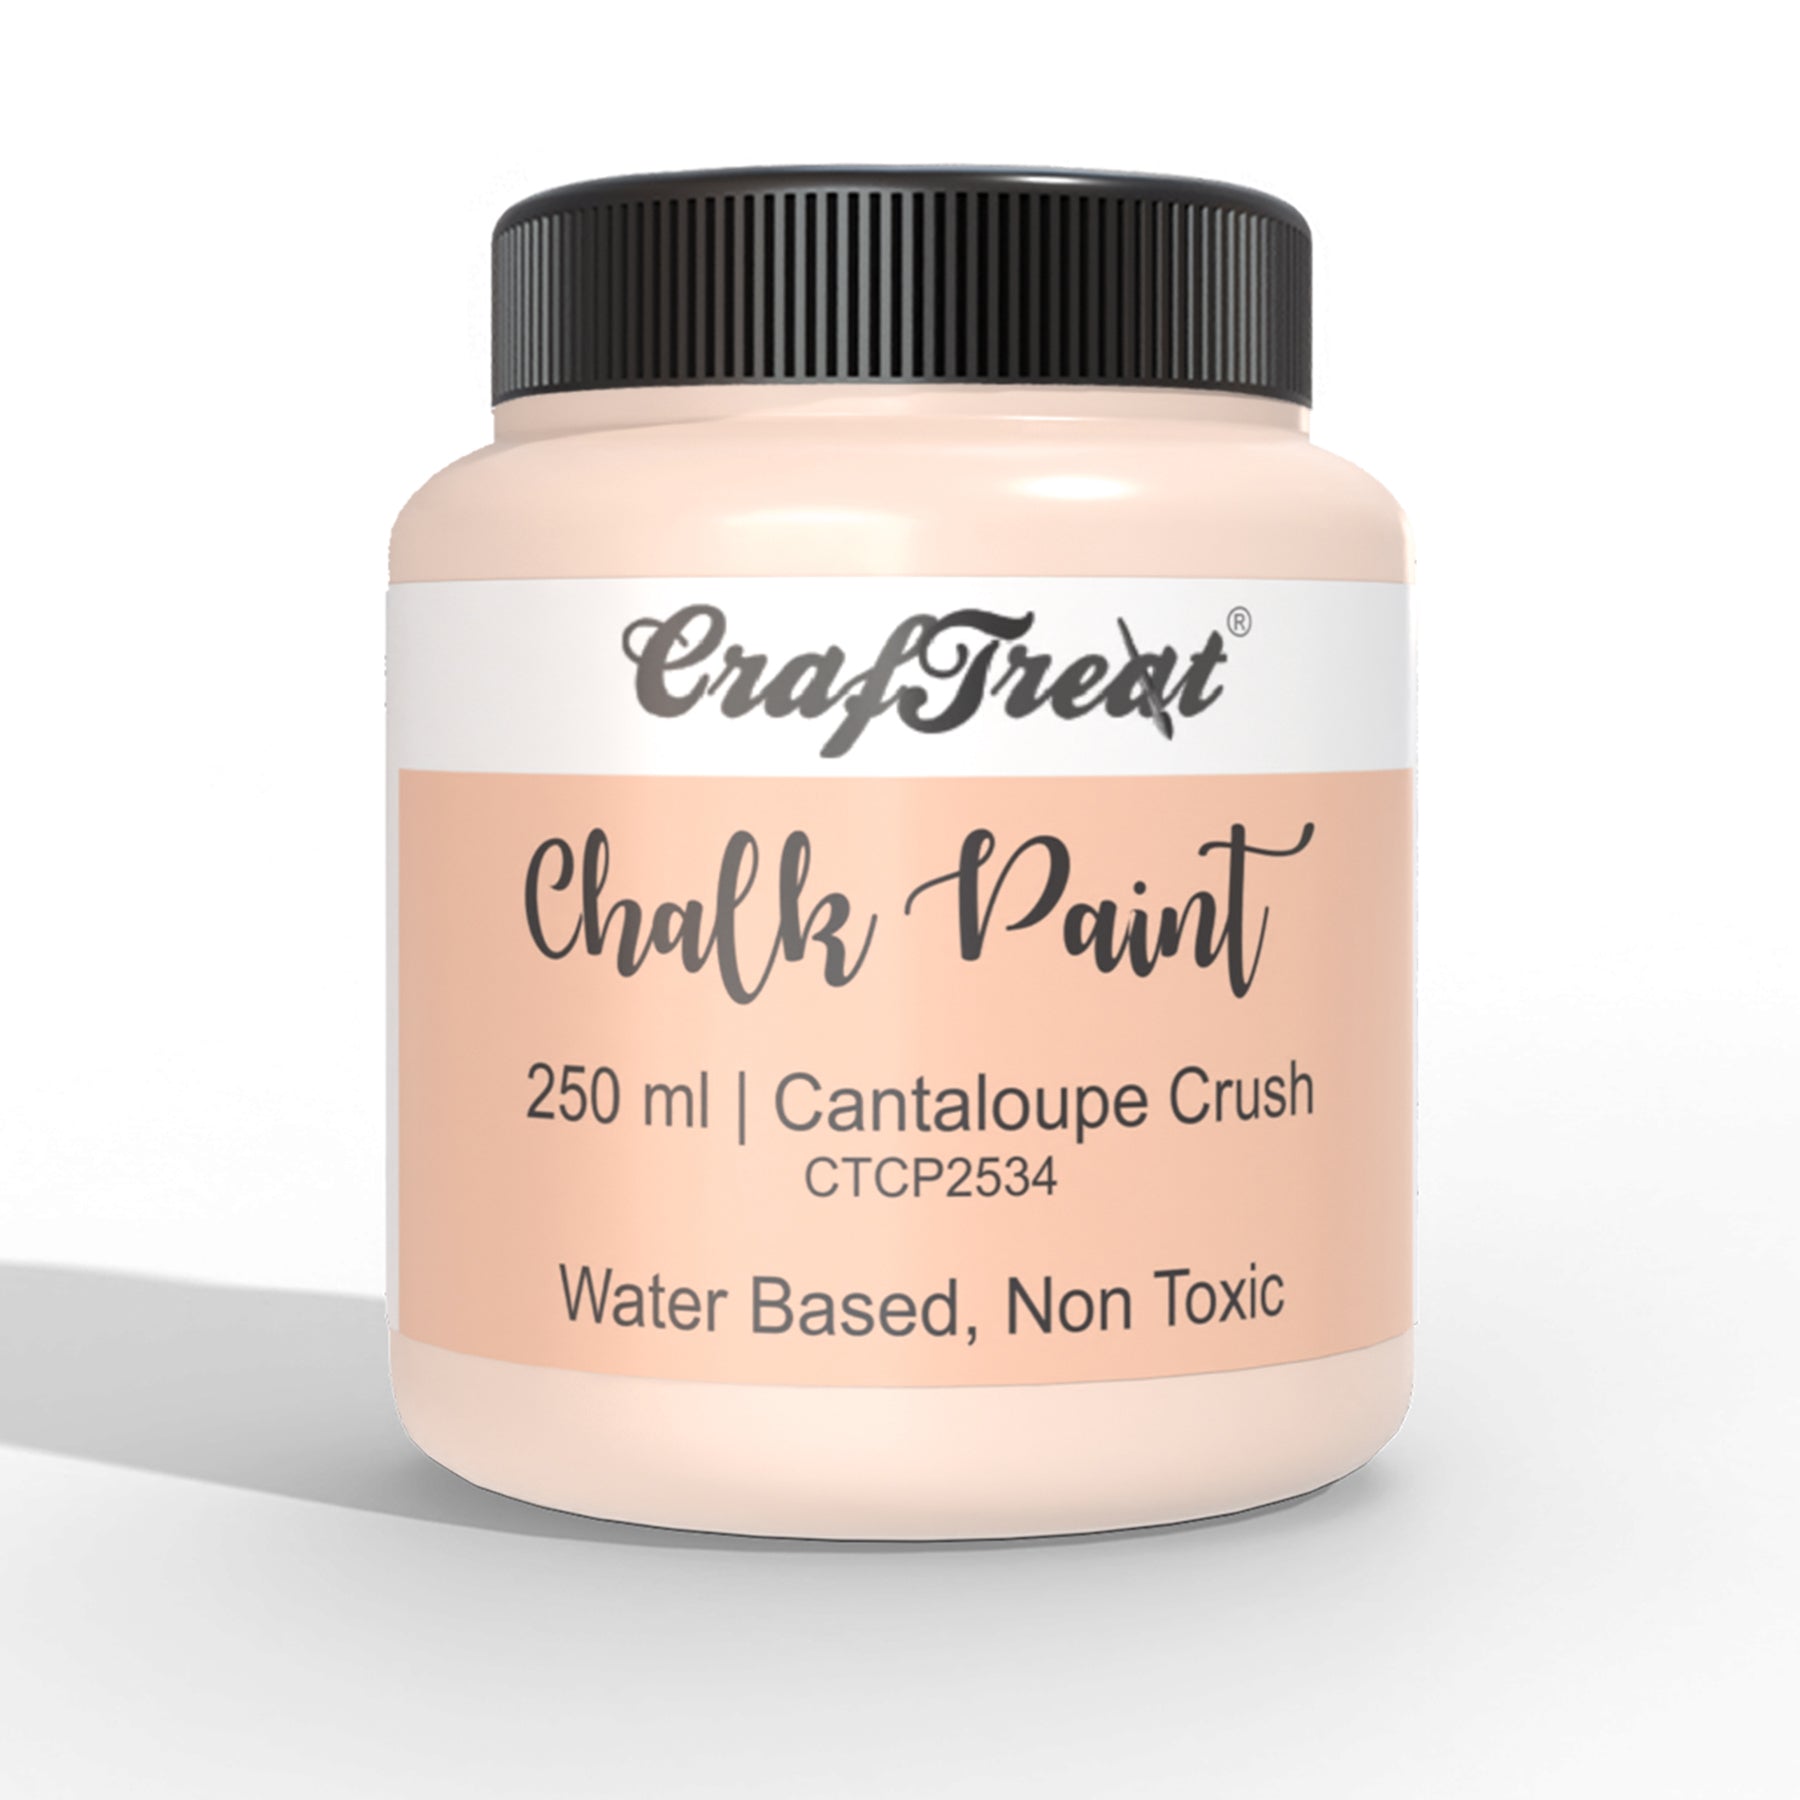 Buy CrafTreat Toasted Oatmeal Acrylic Chalk Paint 250ml, Off White Multi Surface and Mixed Media Paints